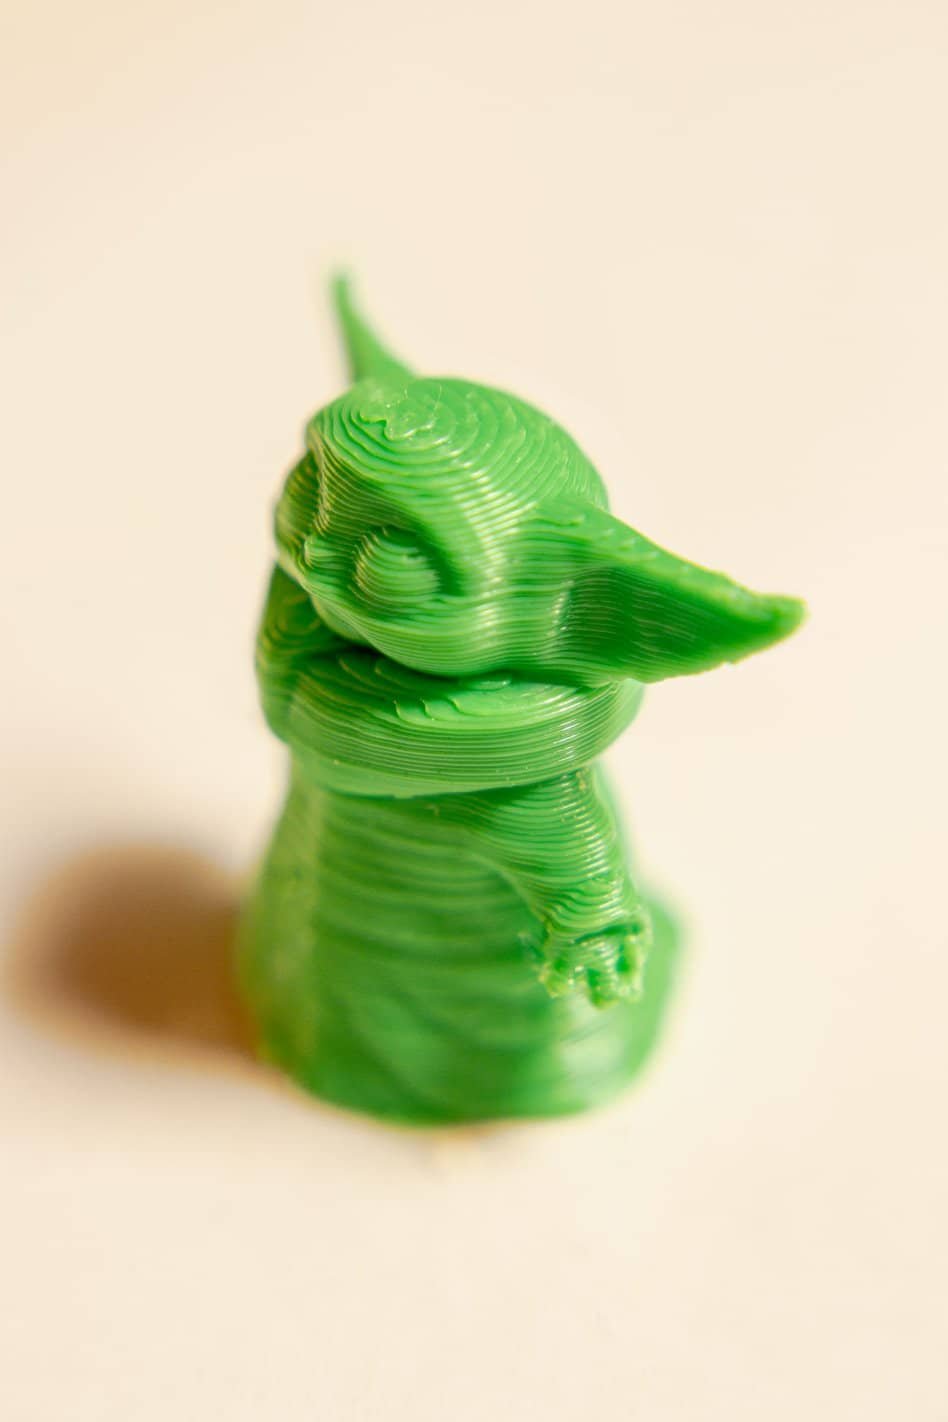 3d printed green creature toy